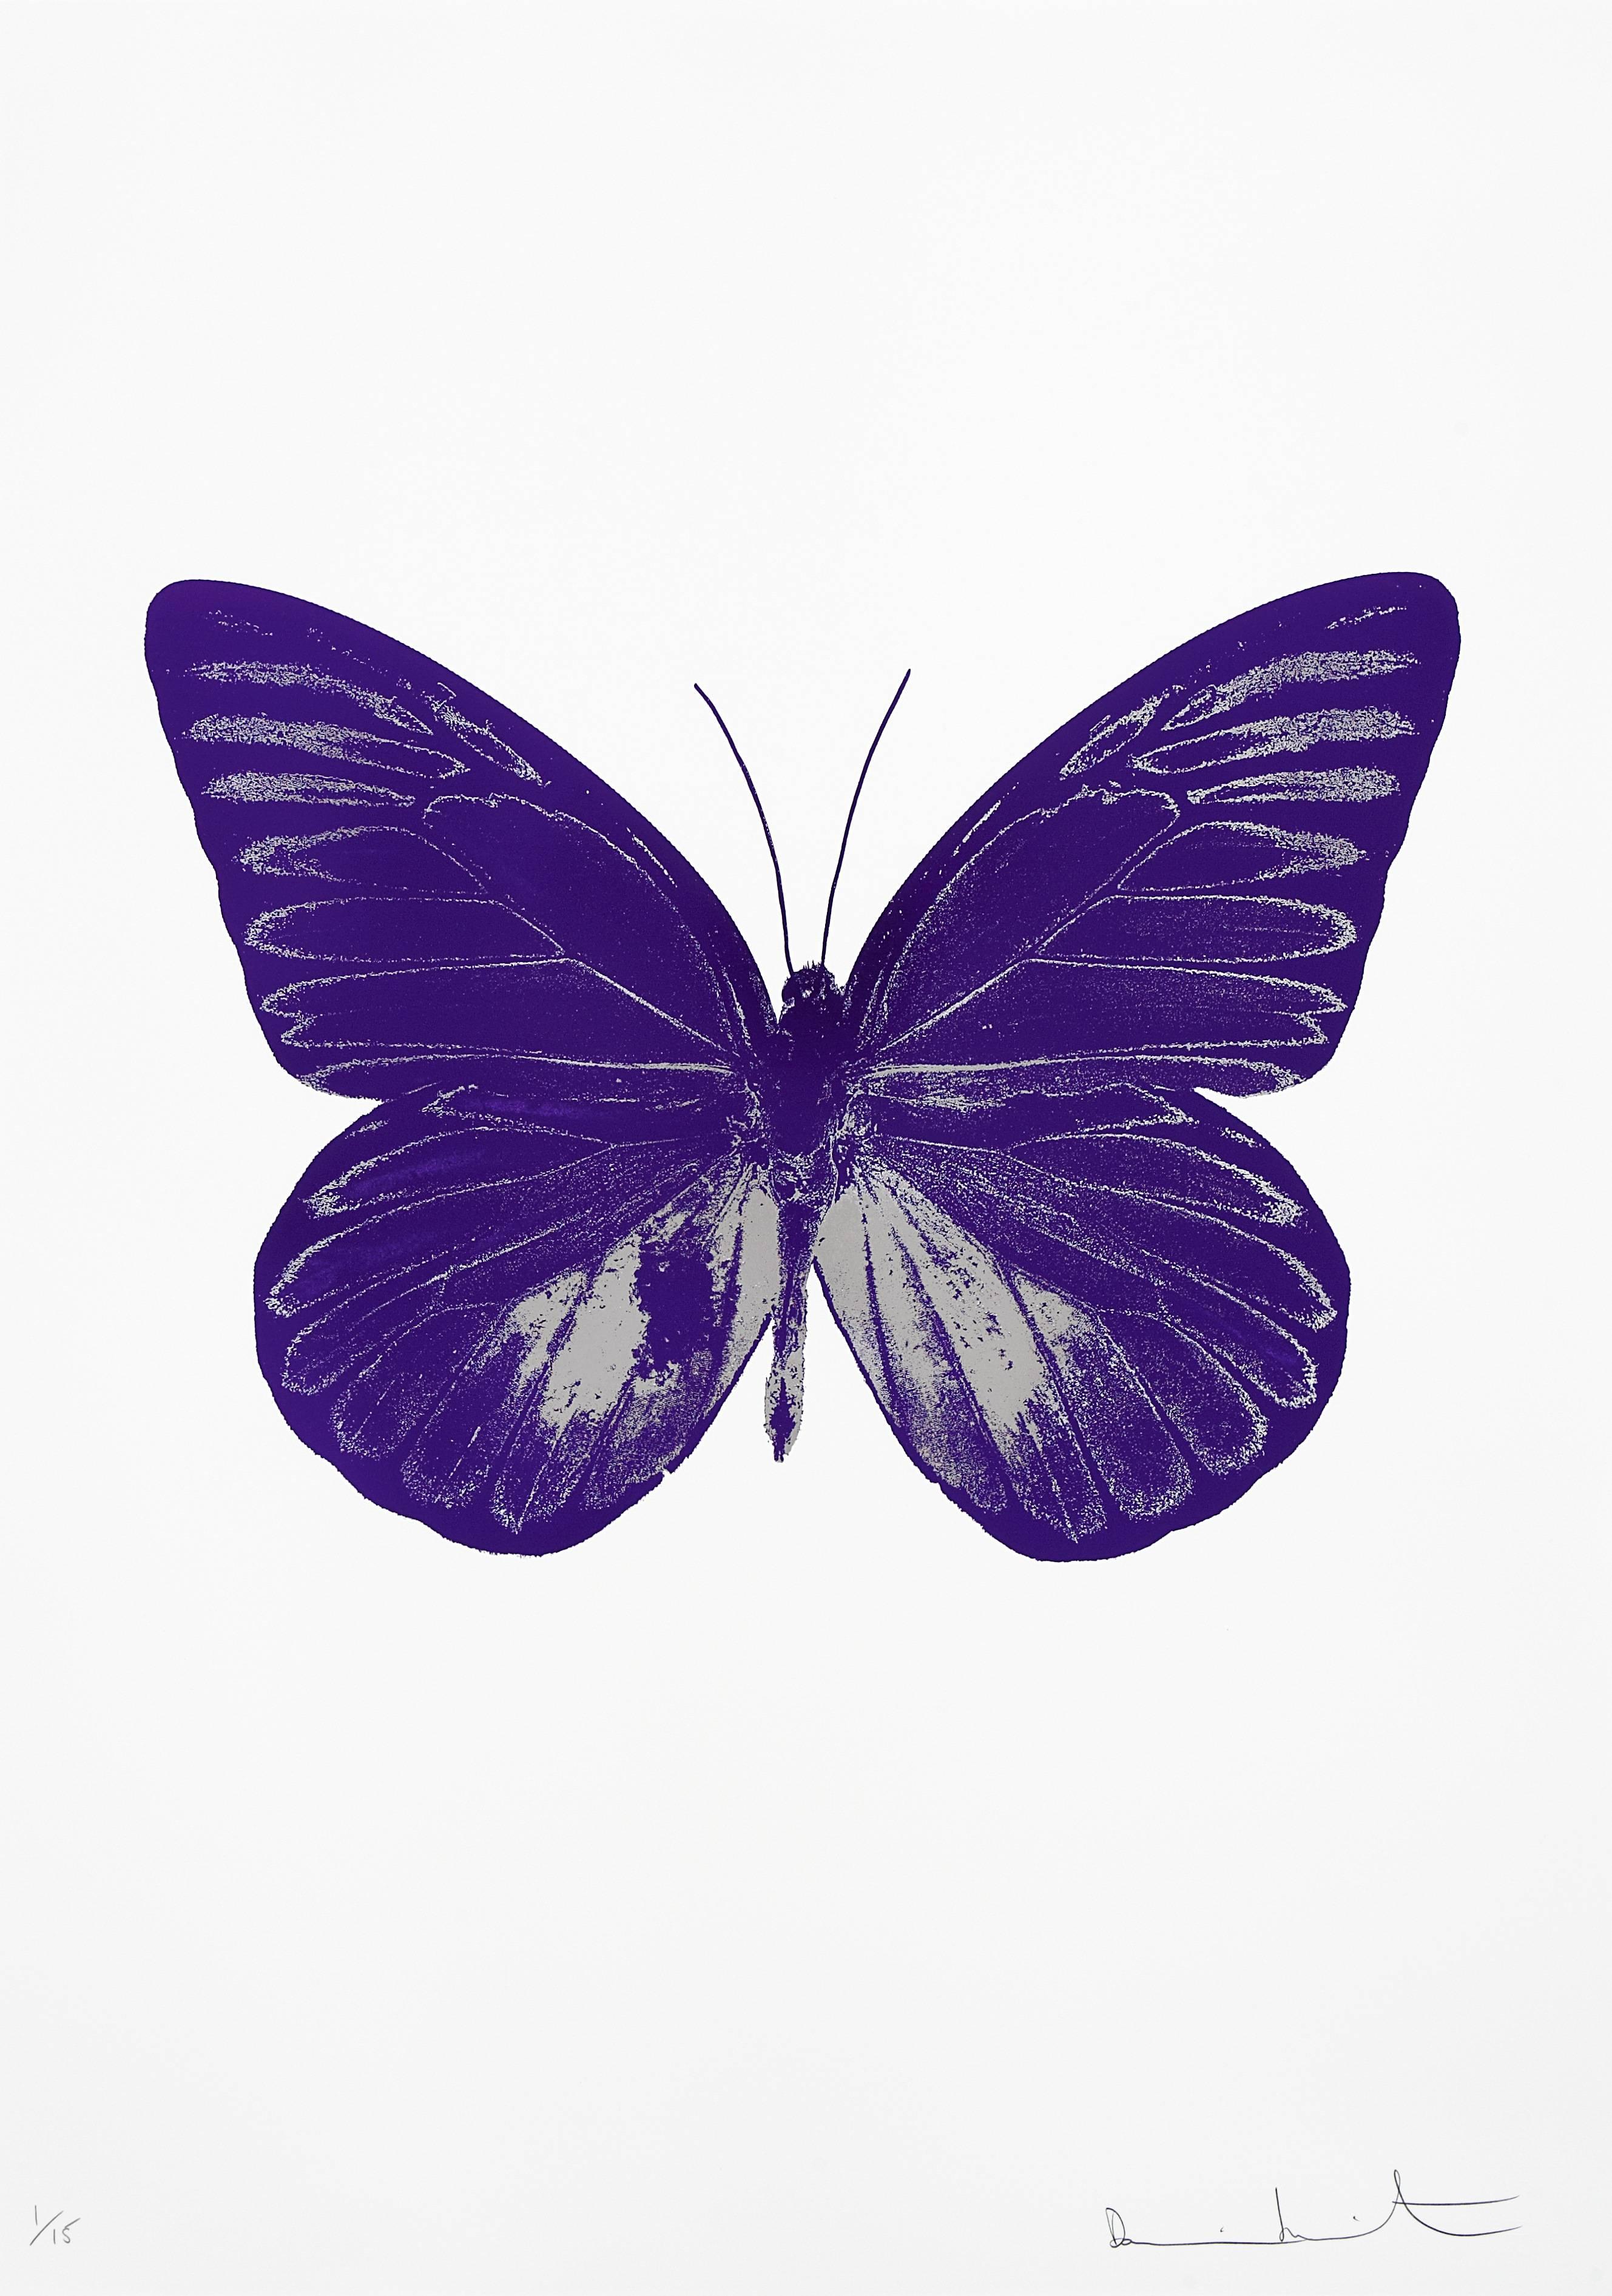 Damien Hirst Animal Print - The Souls I - Imperial Purple/Silver Gloss